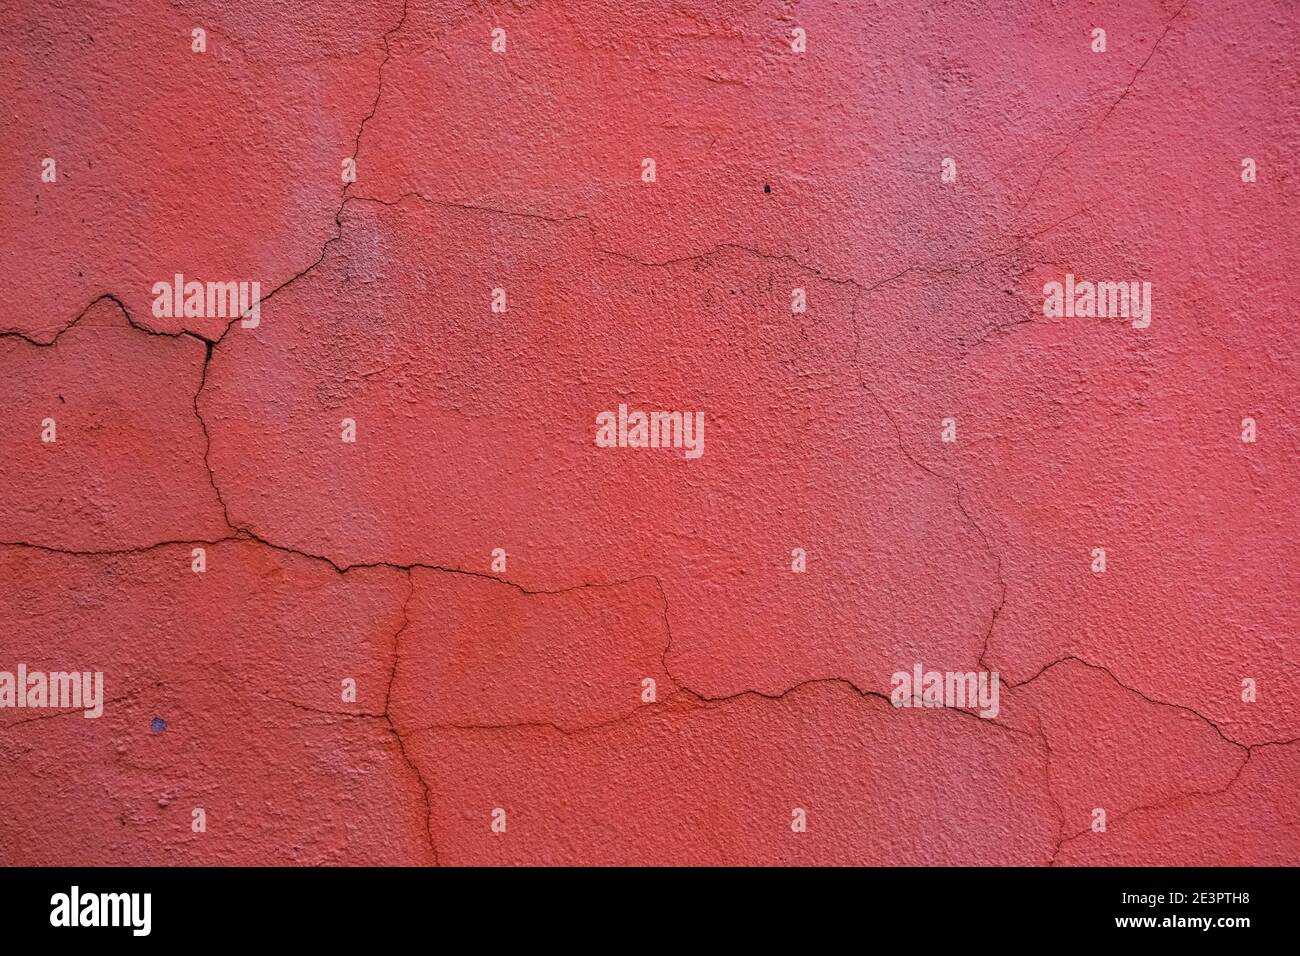 Rough textured red wall with stains, selective focus Stock Photo